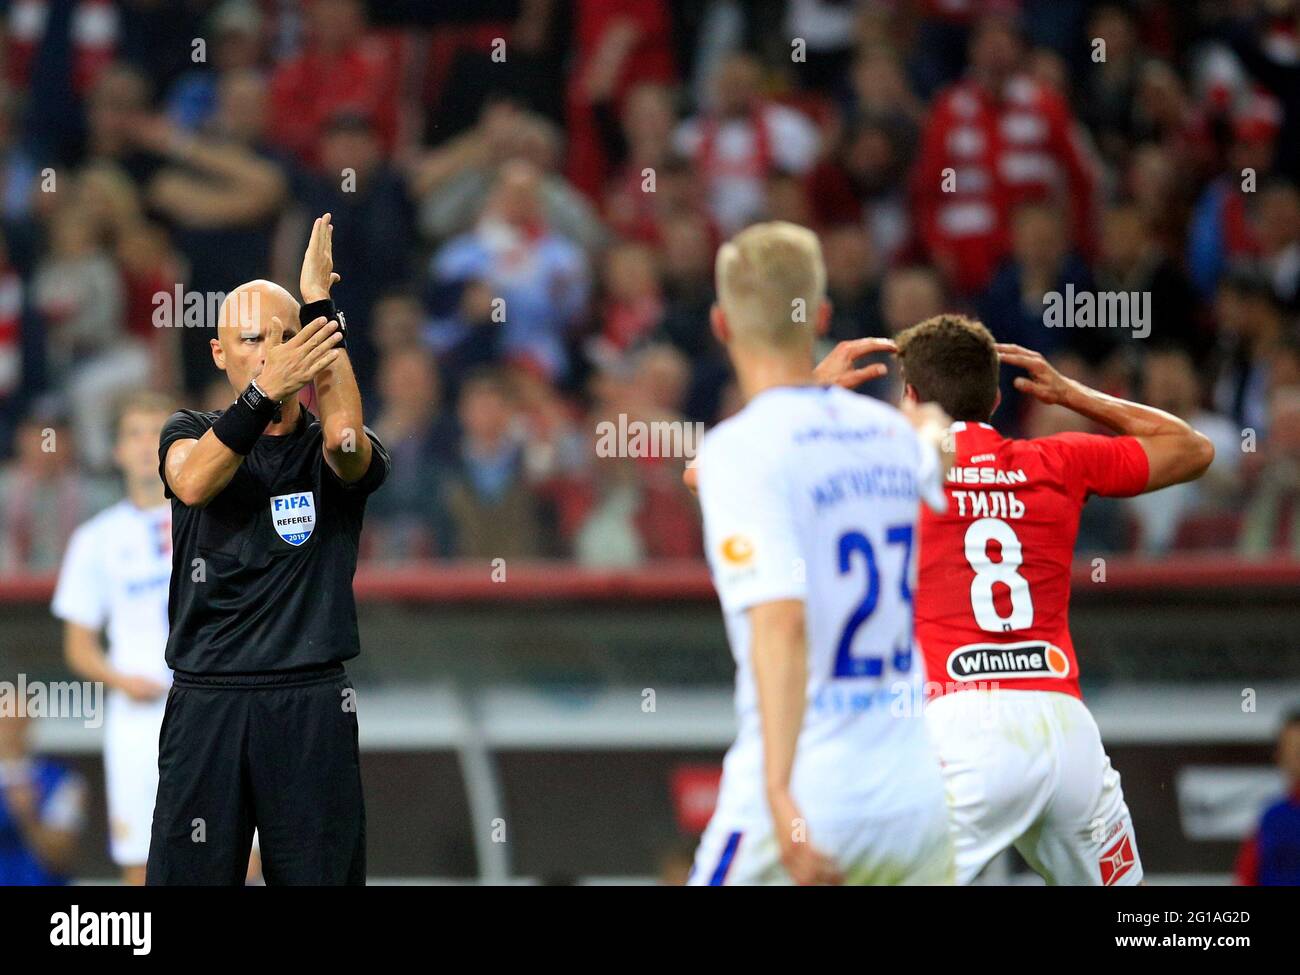 MOSCOW, RUSSIA - AUGUST 19, 2019: The 2019/20 Russian Football Premier  League. Round 6. Football match between Spartak (Moscow) vs CSKA (Moscow)  at Otkrytie Arena. Photo by Stupnikov Alexander/FC Spartak Stock Photo -  Alamy